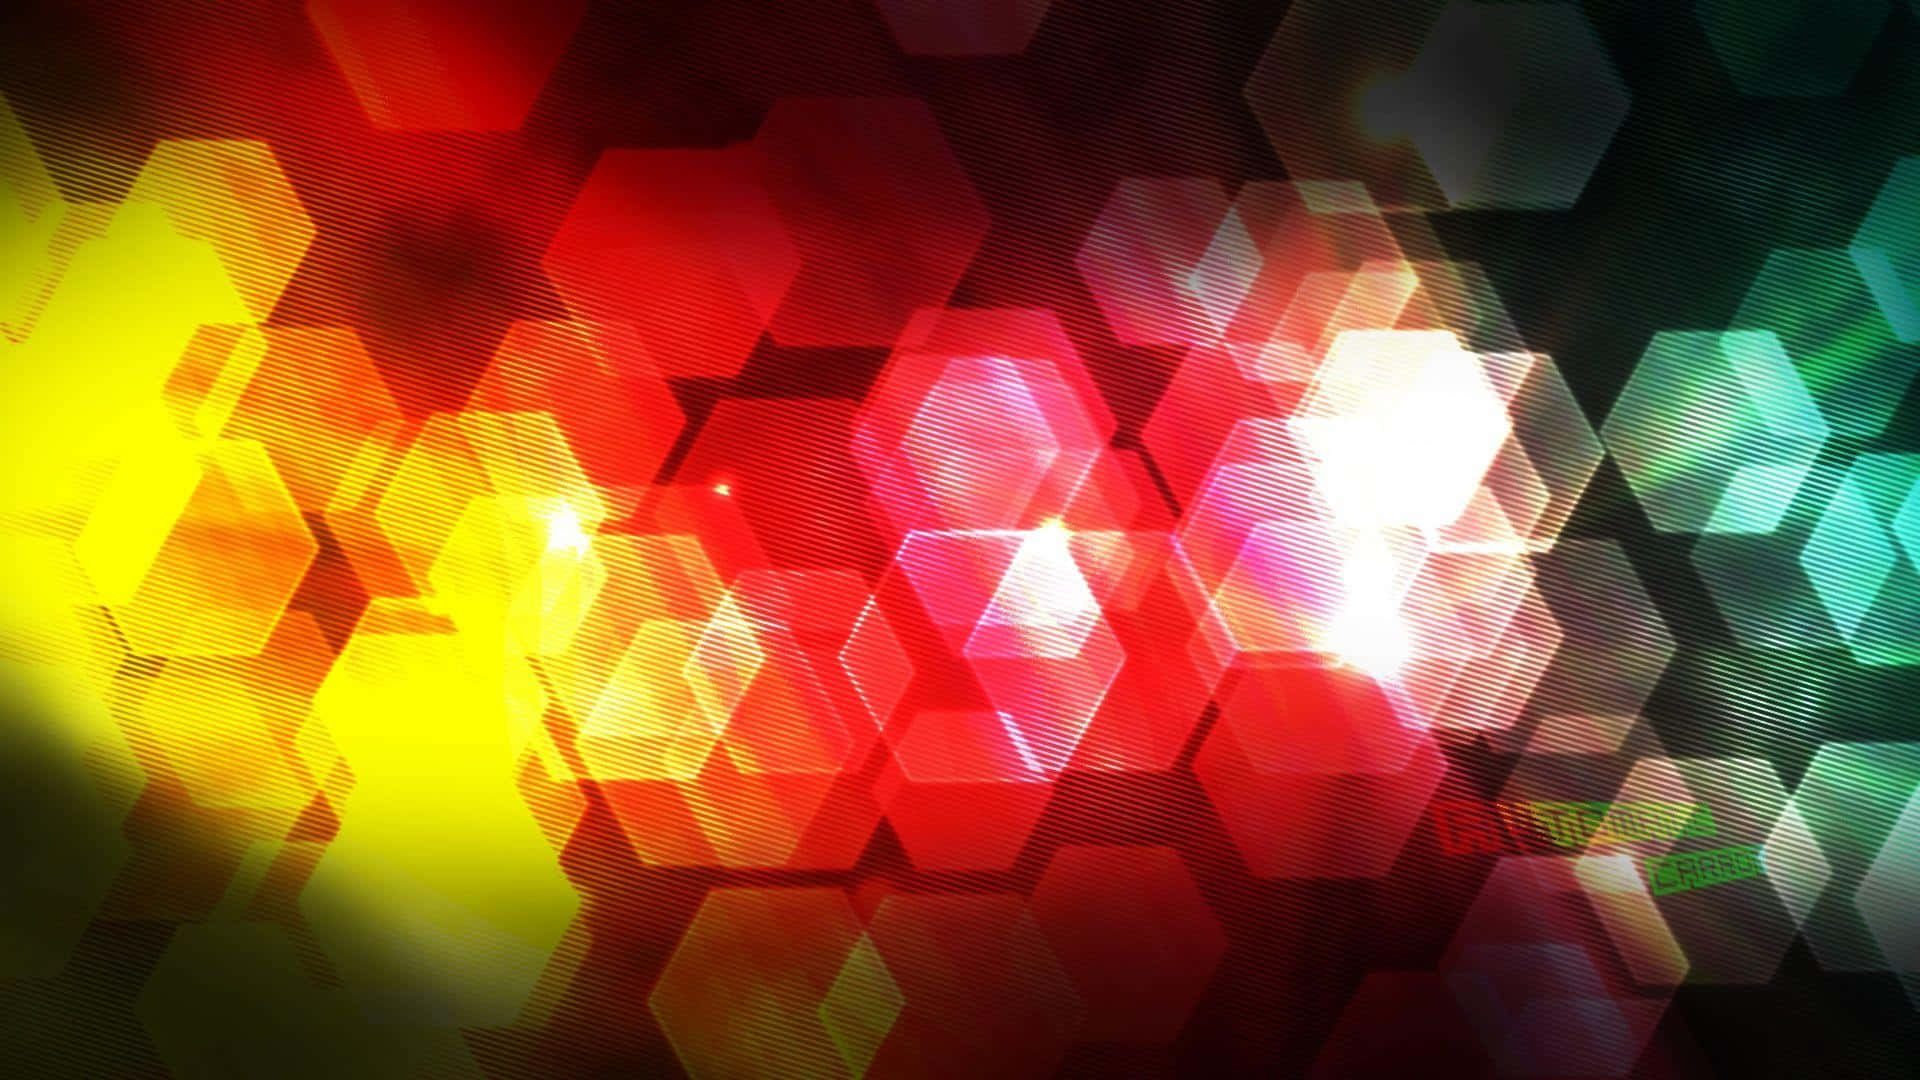 A Colorful Abstract Background With A Rainbow Of Lights